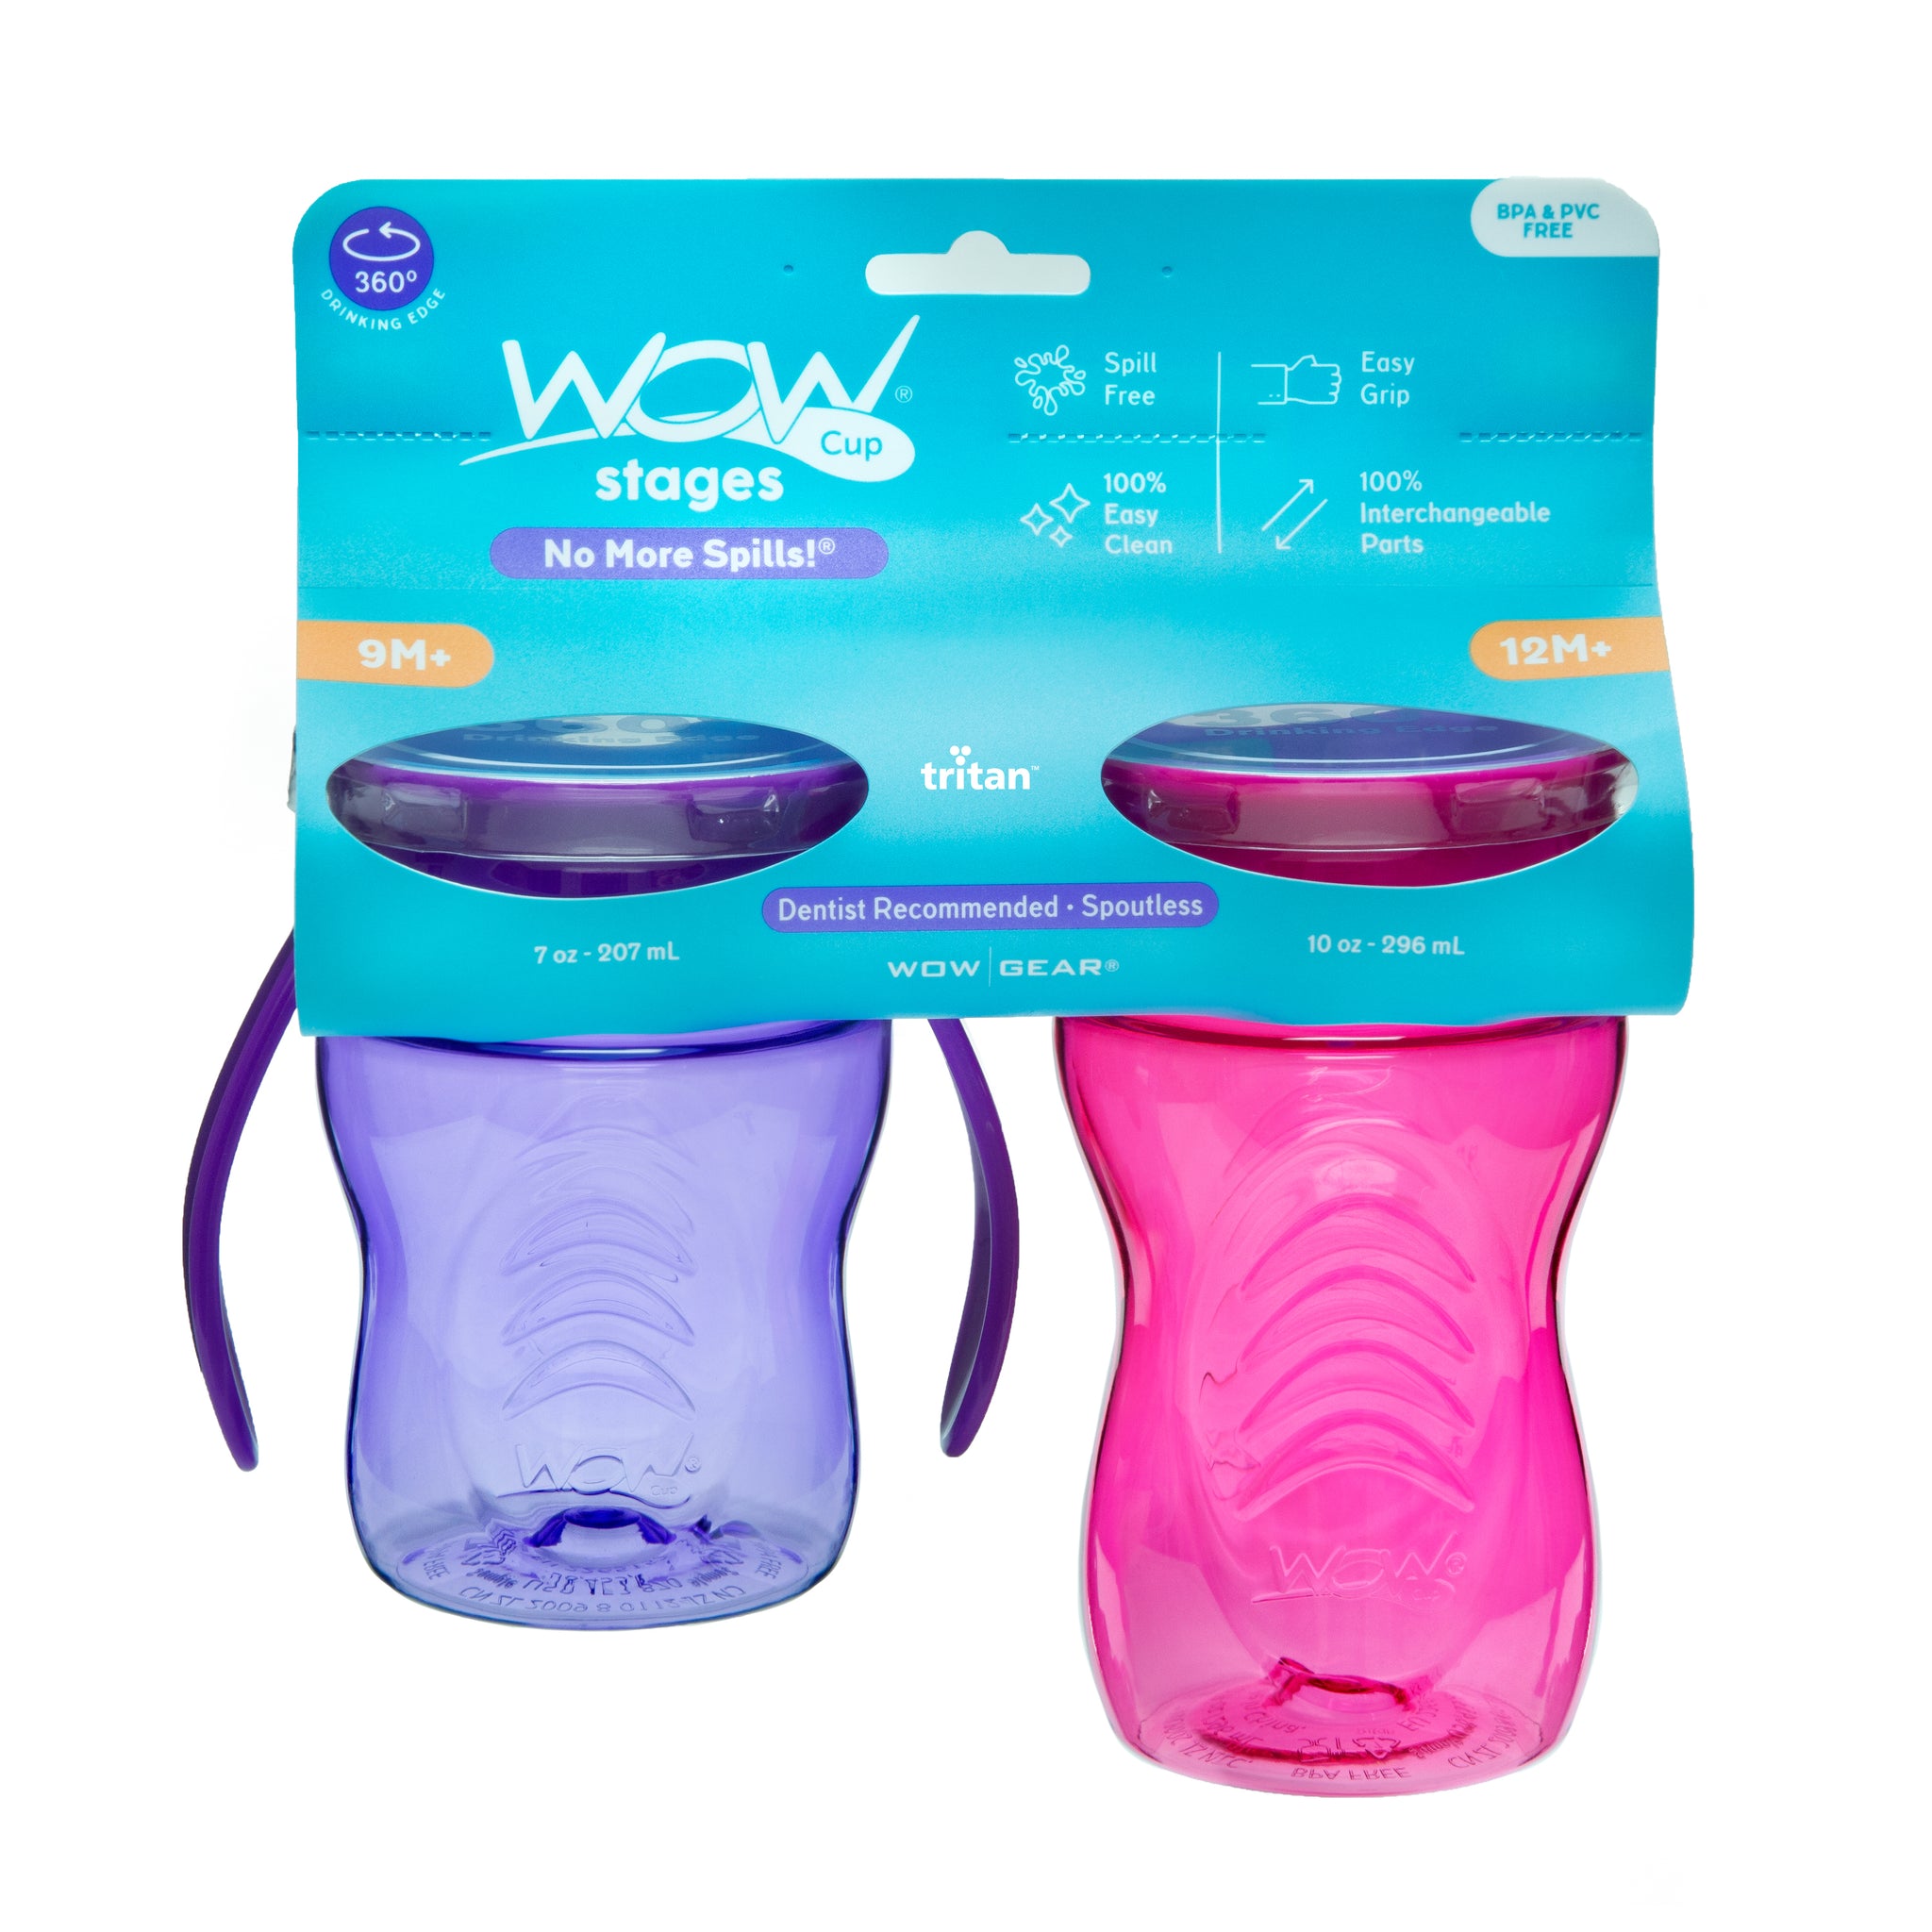 Wow Cup Wow Cup for Kids Original 360 Sippy Cup (Assorted Colors) Pink 